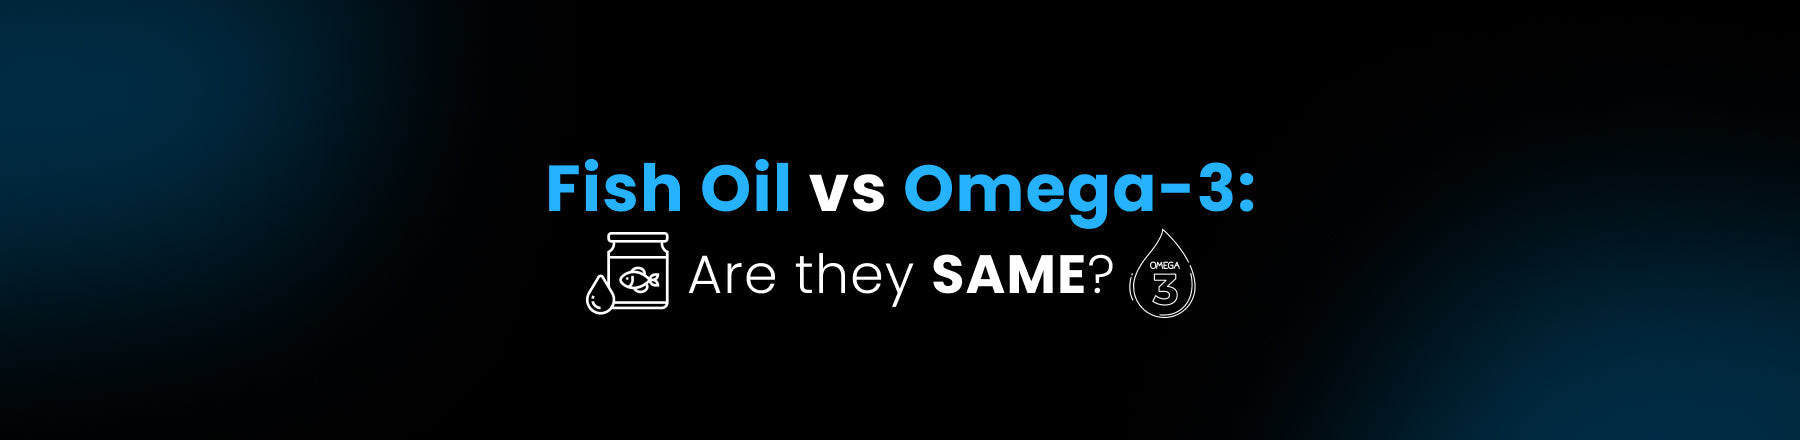 Fish Oil and Omega 3 -Are they same?